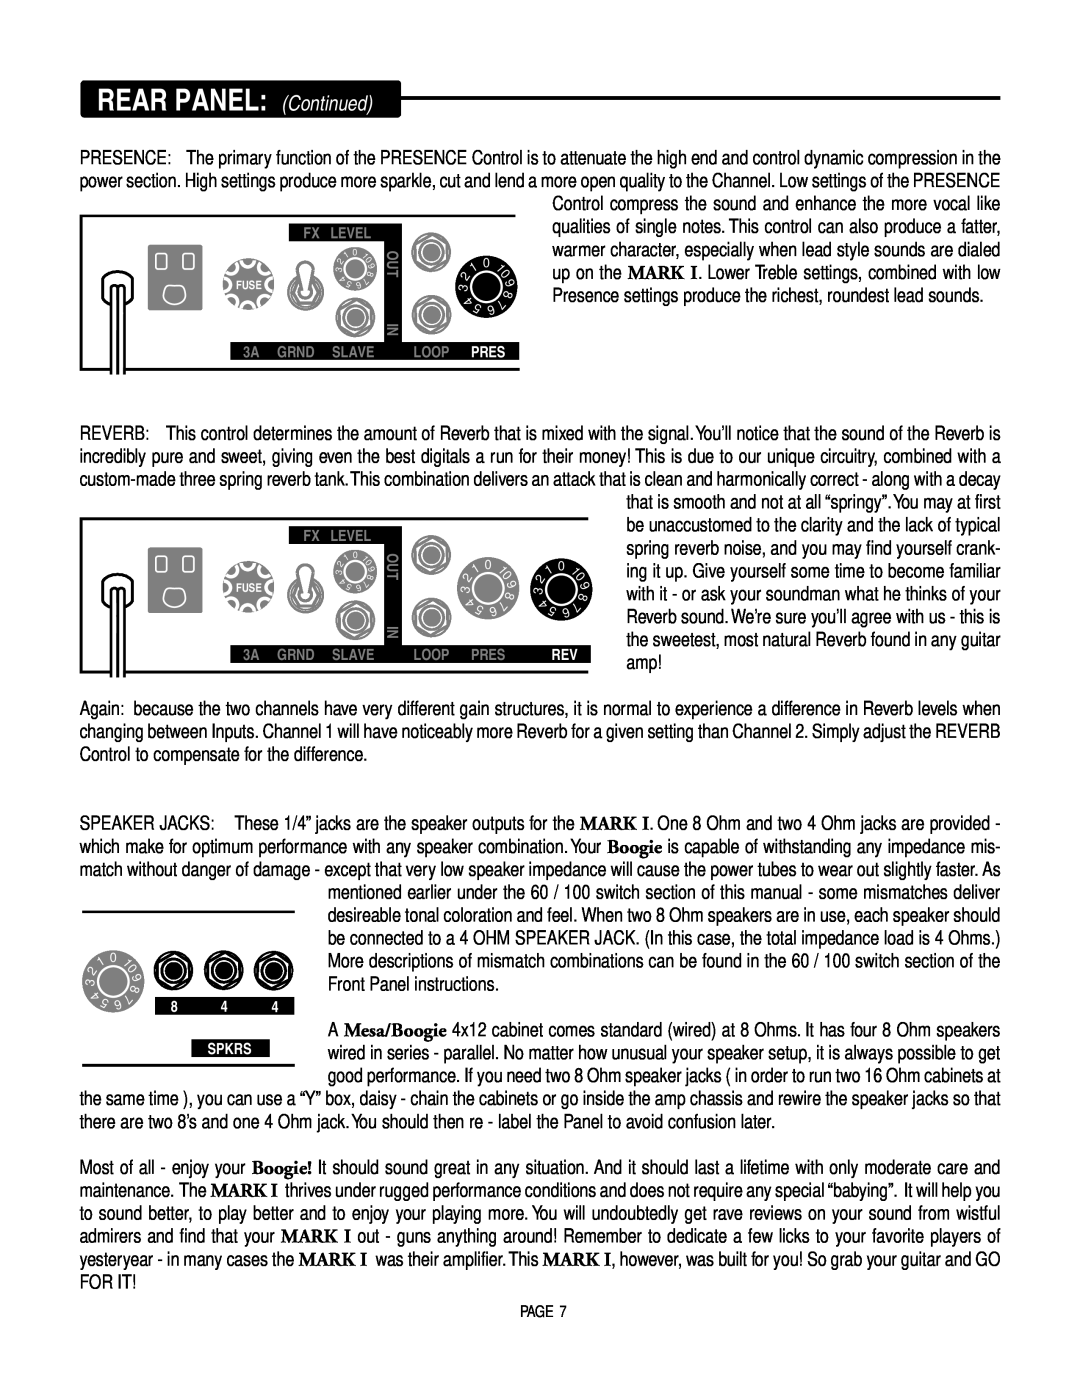 Mesa/Boogie MARK 1 owner manual REAR PANEL Continued, Front Panel instructions 